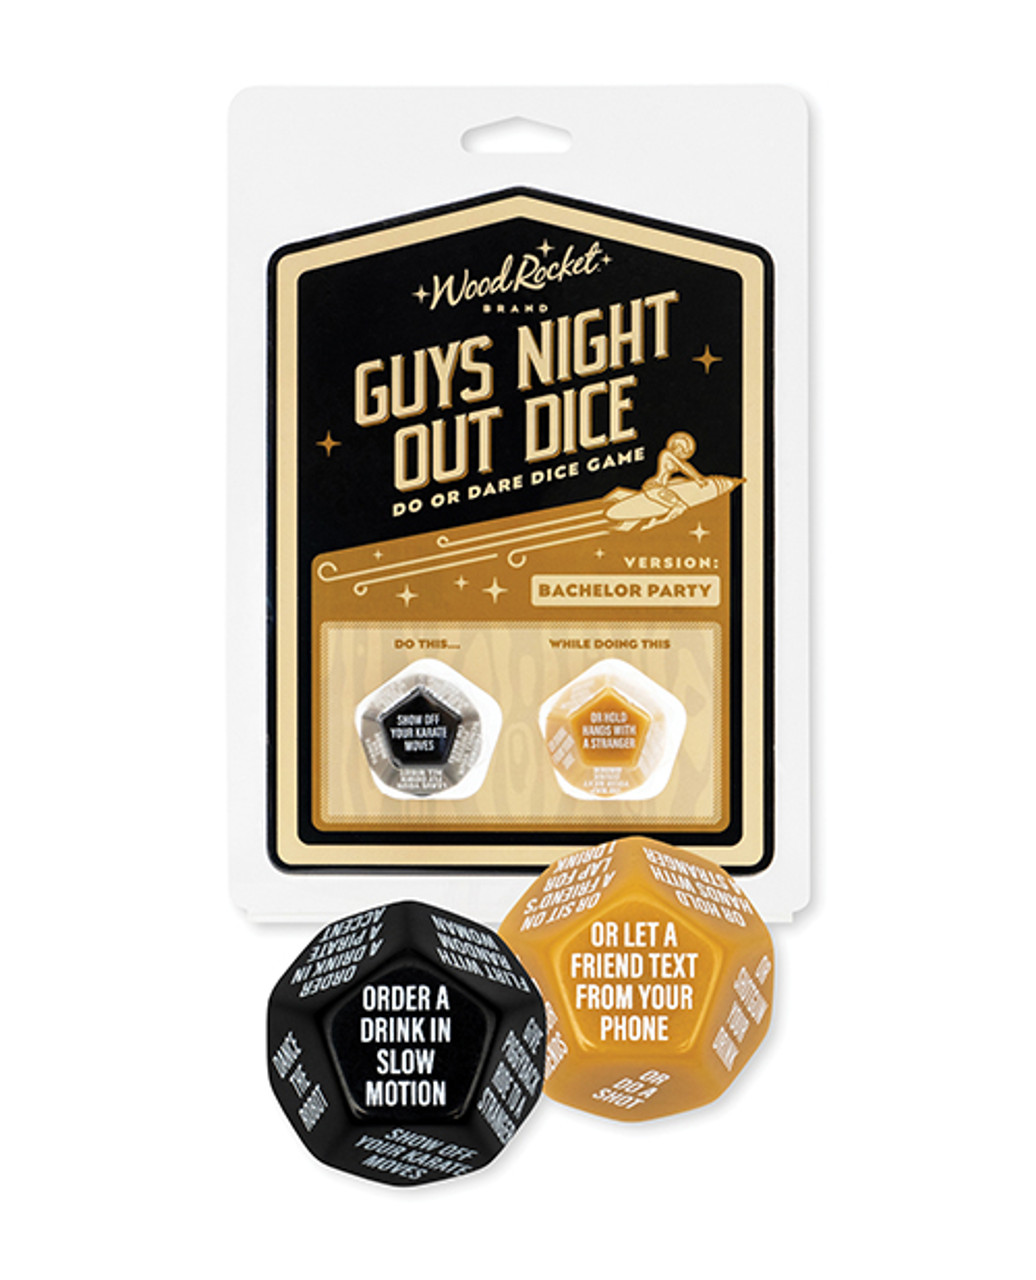 GUYS NIGHT OUT DICE (NET)